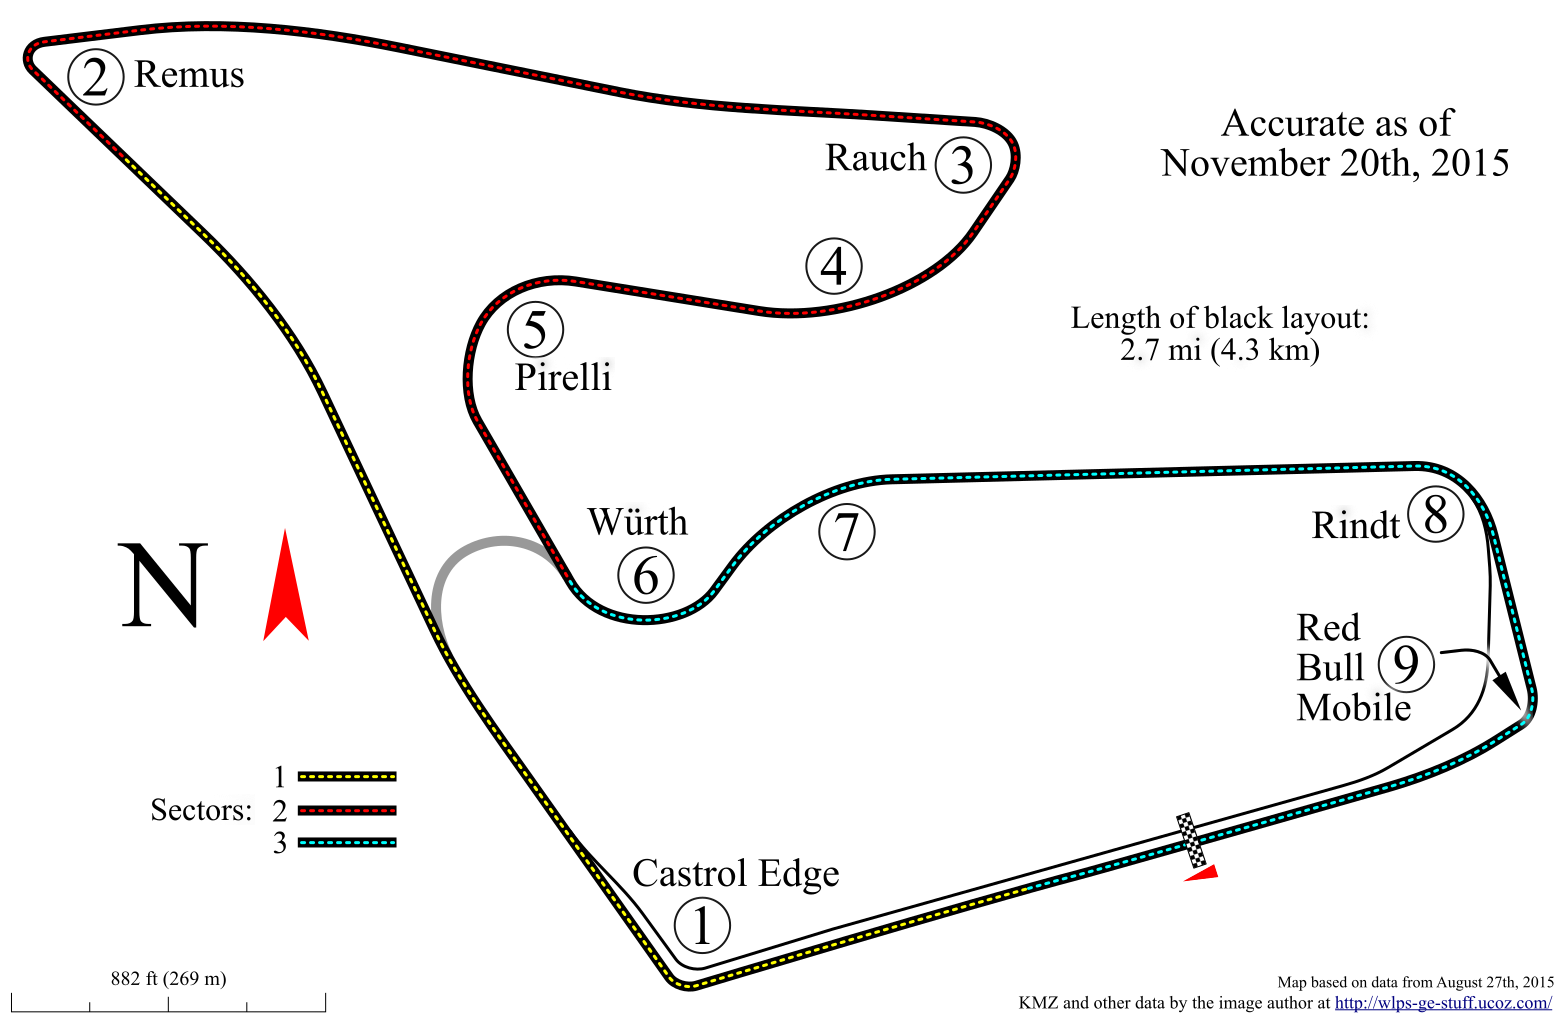 Red Bull Ring as of 2015 (formerly A1 Ring)